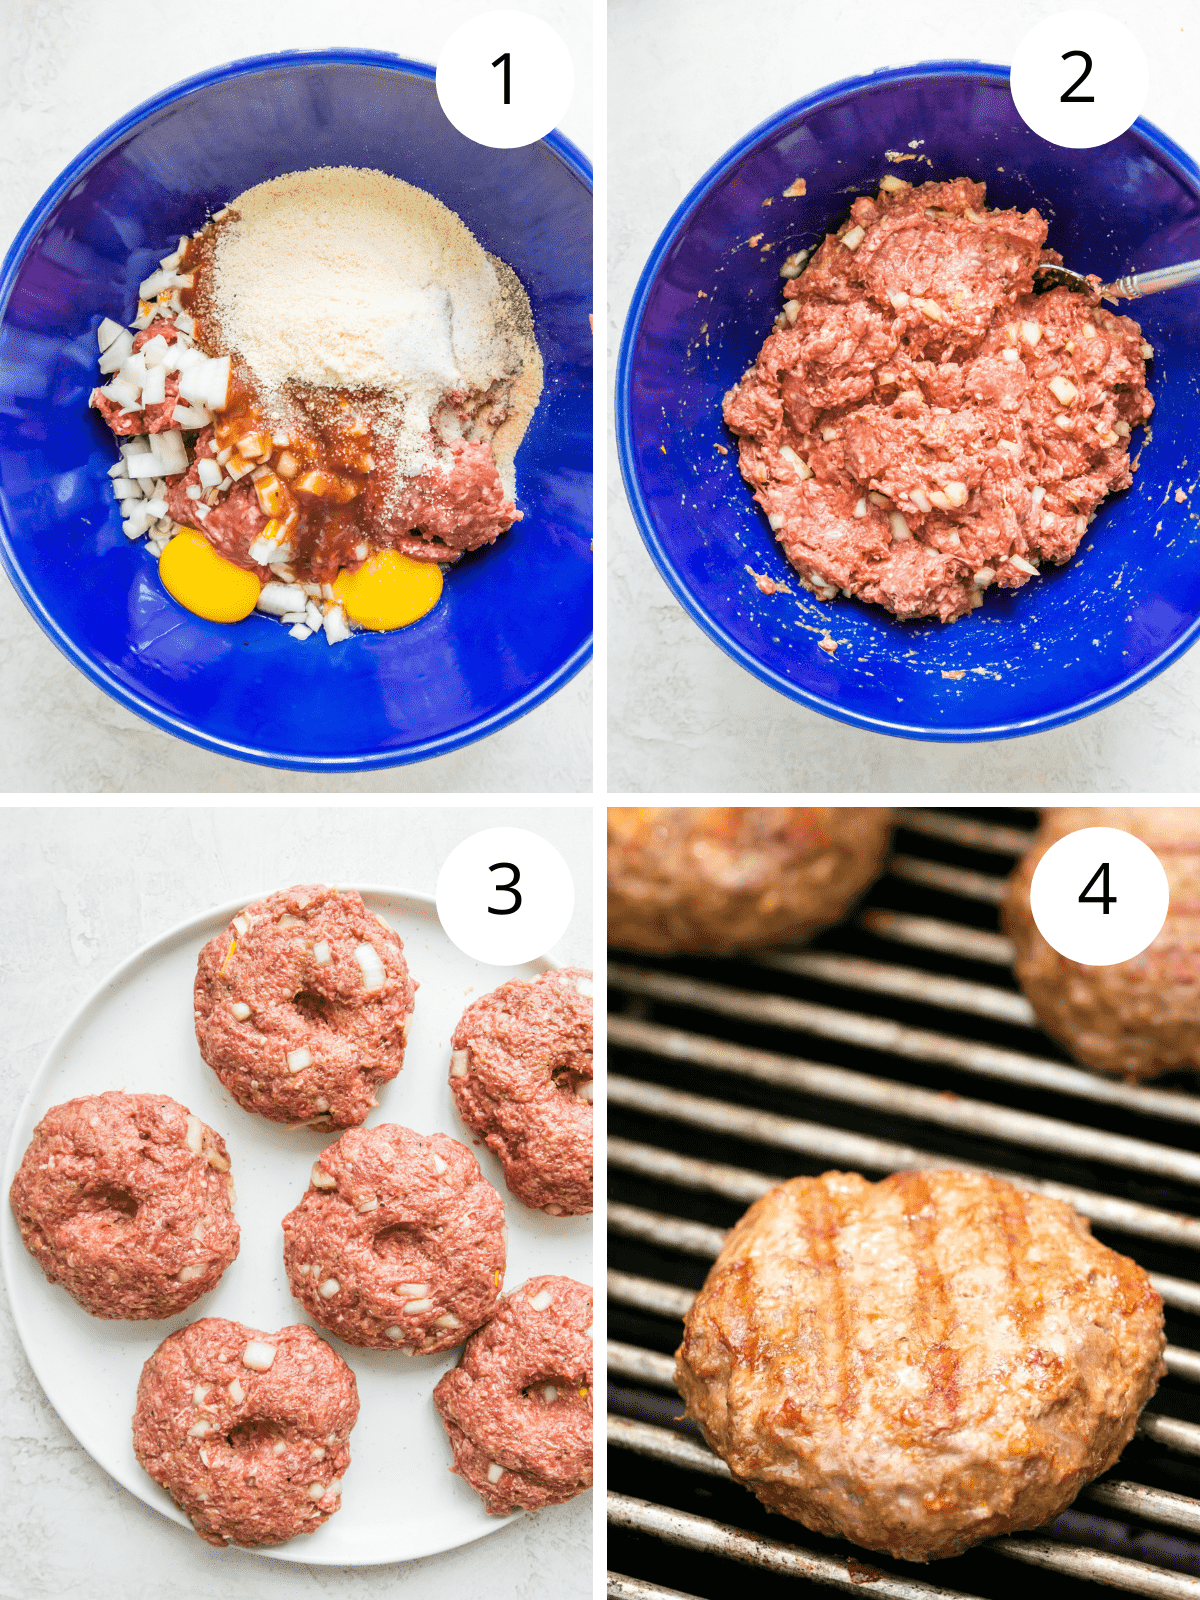 Step by step directions for making gluten free burgers on the grill.